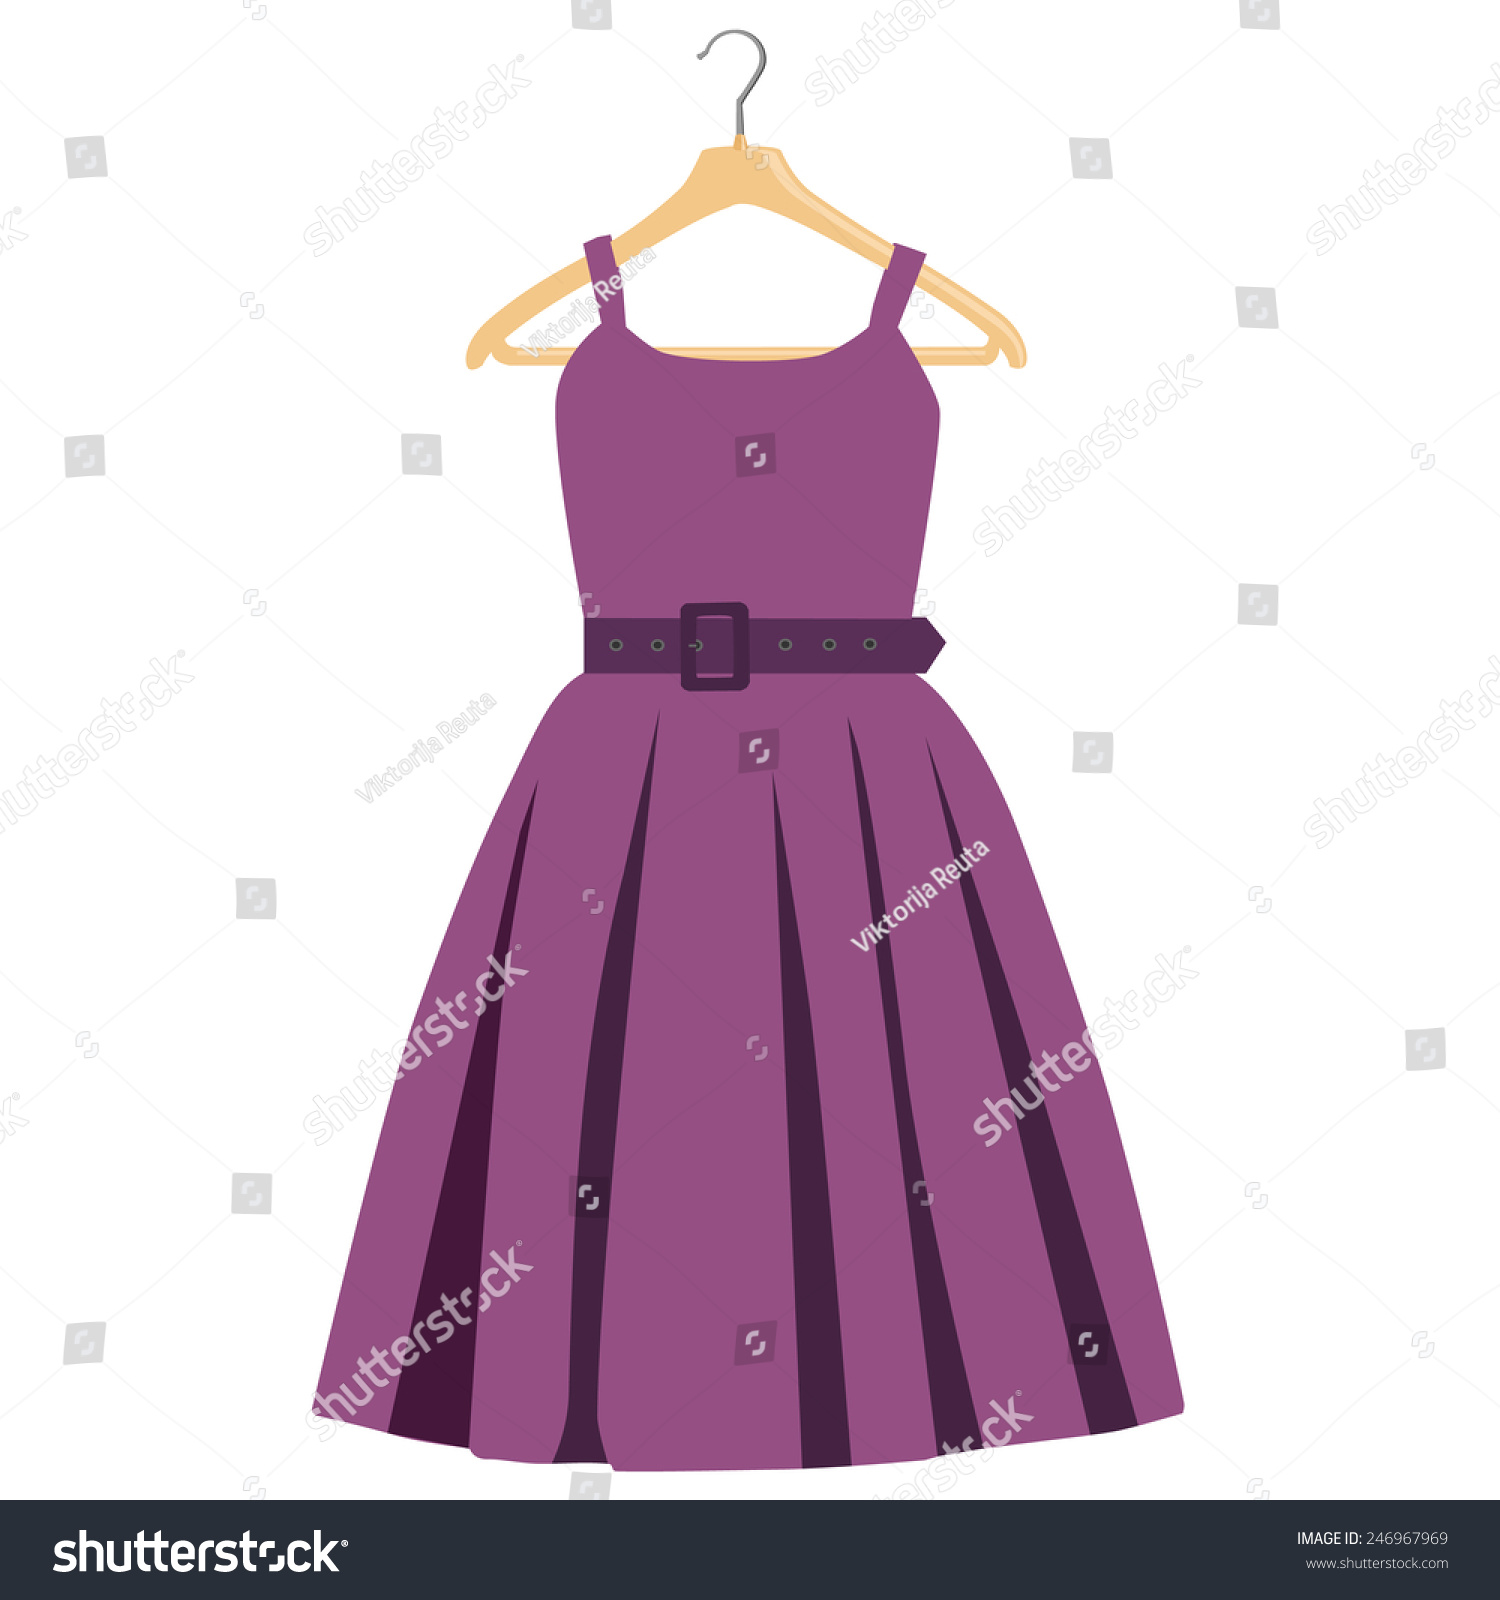 Fashion Woman Purple Dress On Wooden Stock Vector (Royalty Free ...